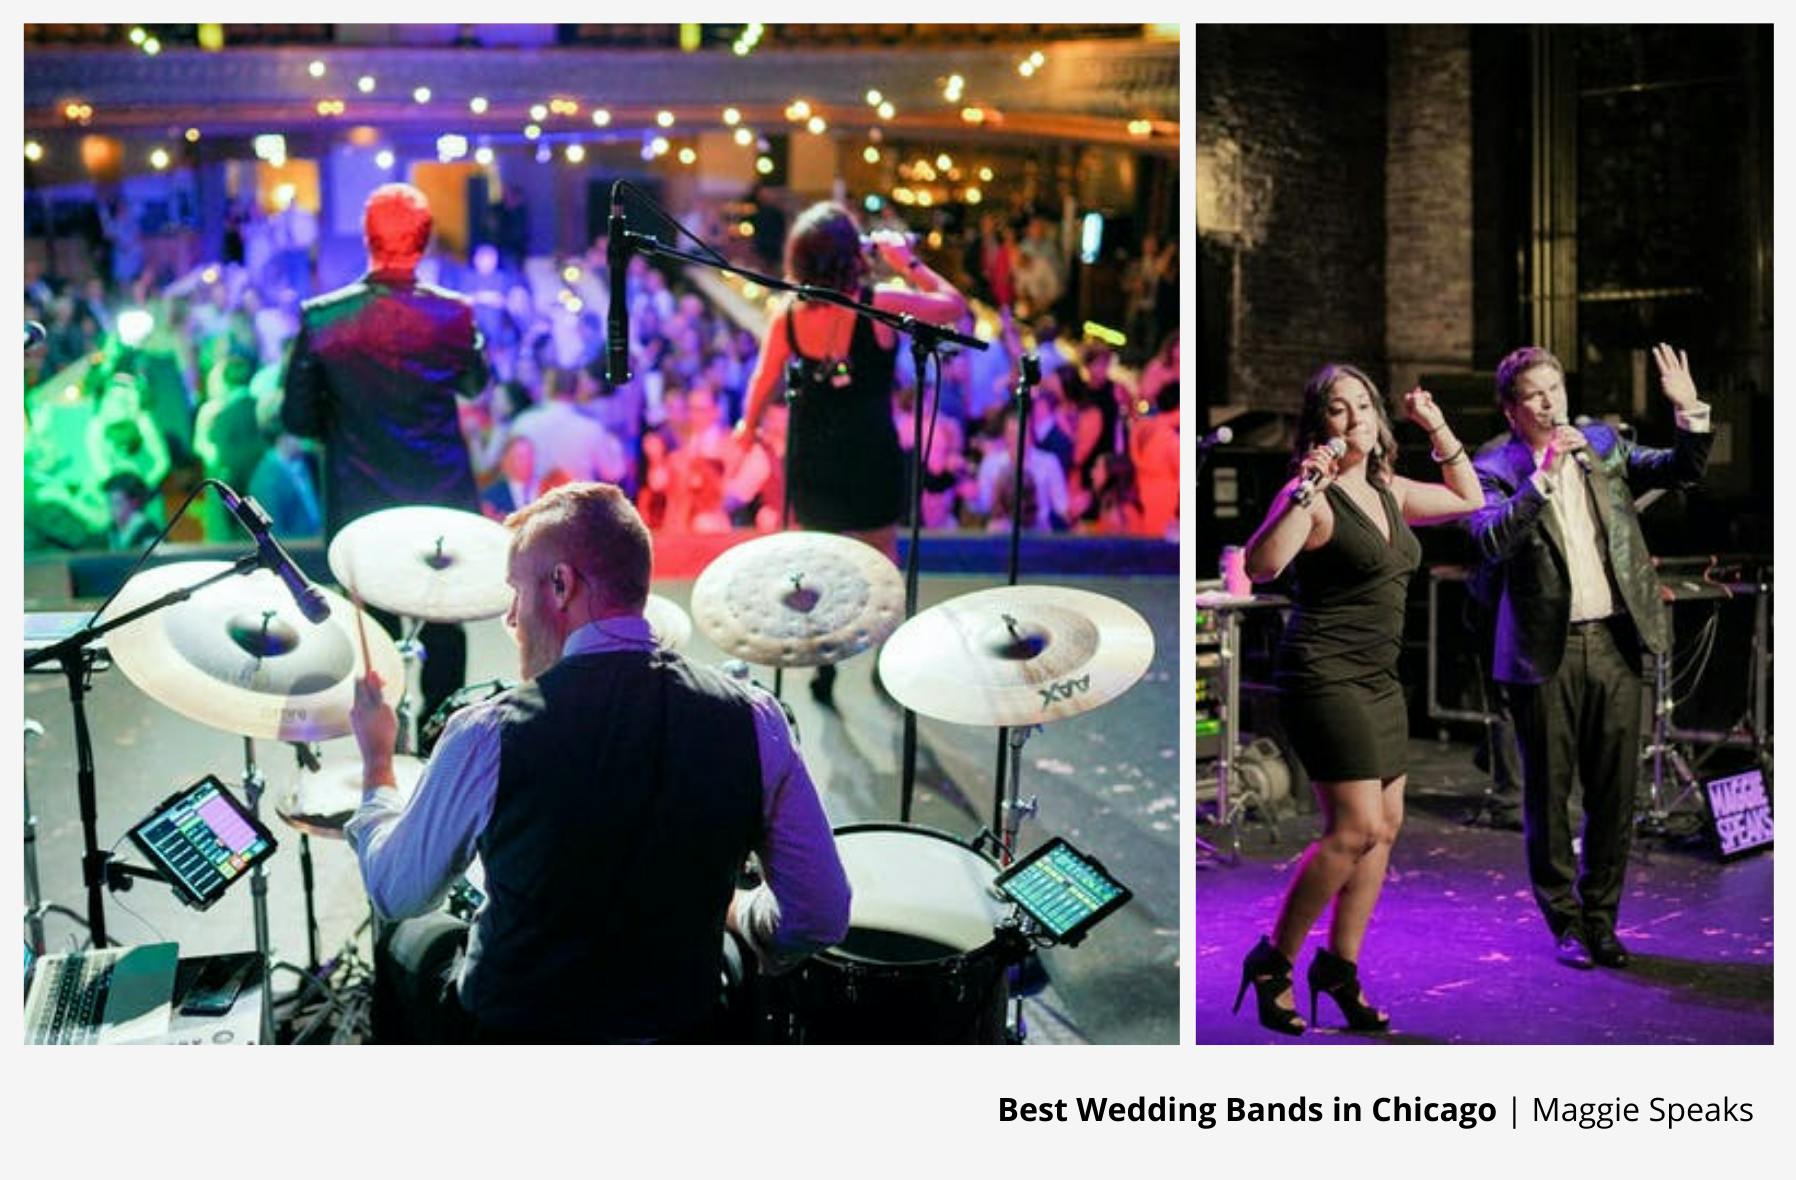 Drummer and Lead Singers of Maggie Speaks Wedding Entertainment on Stage | PartySlate